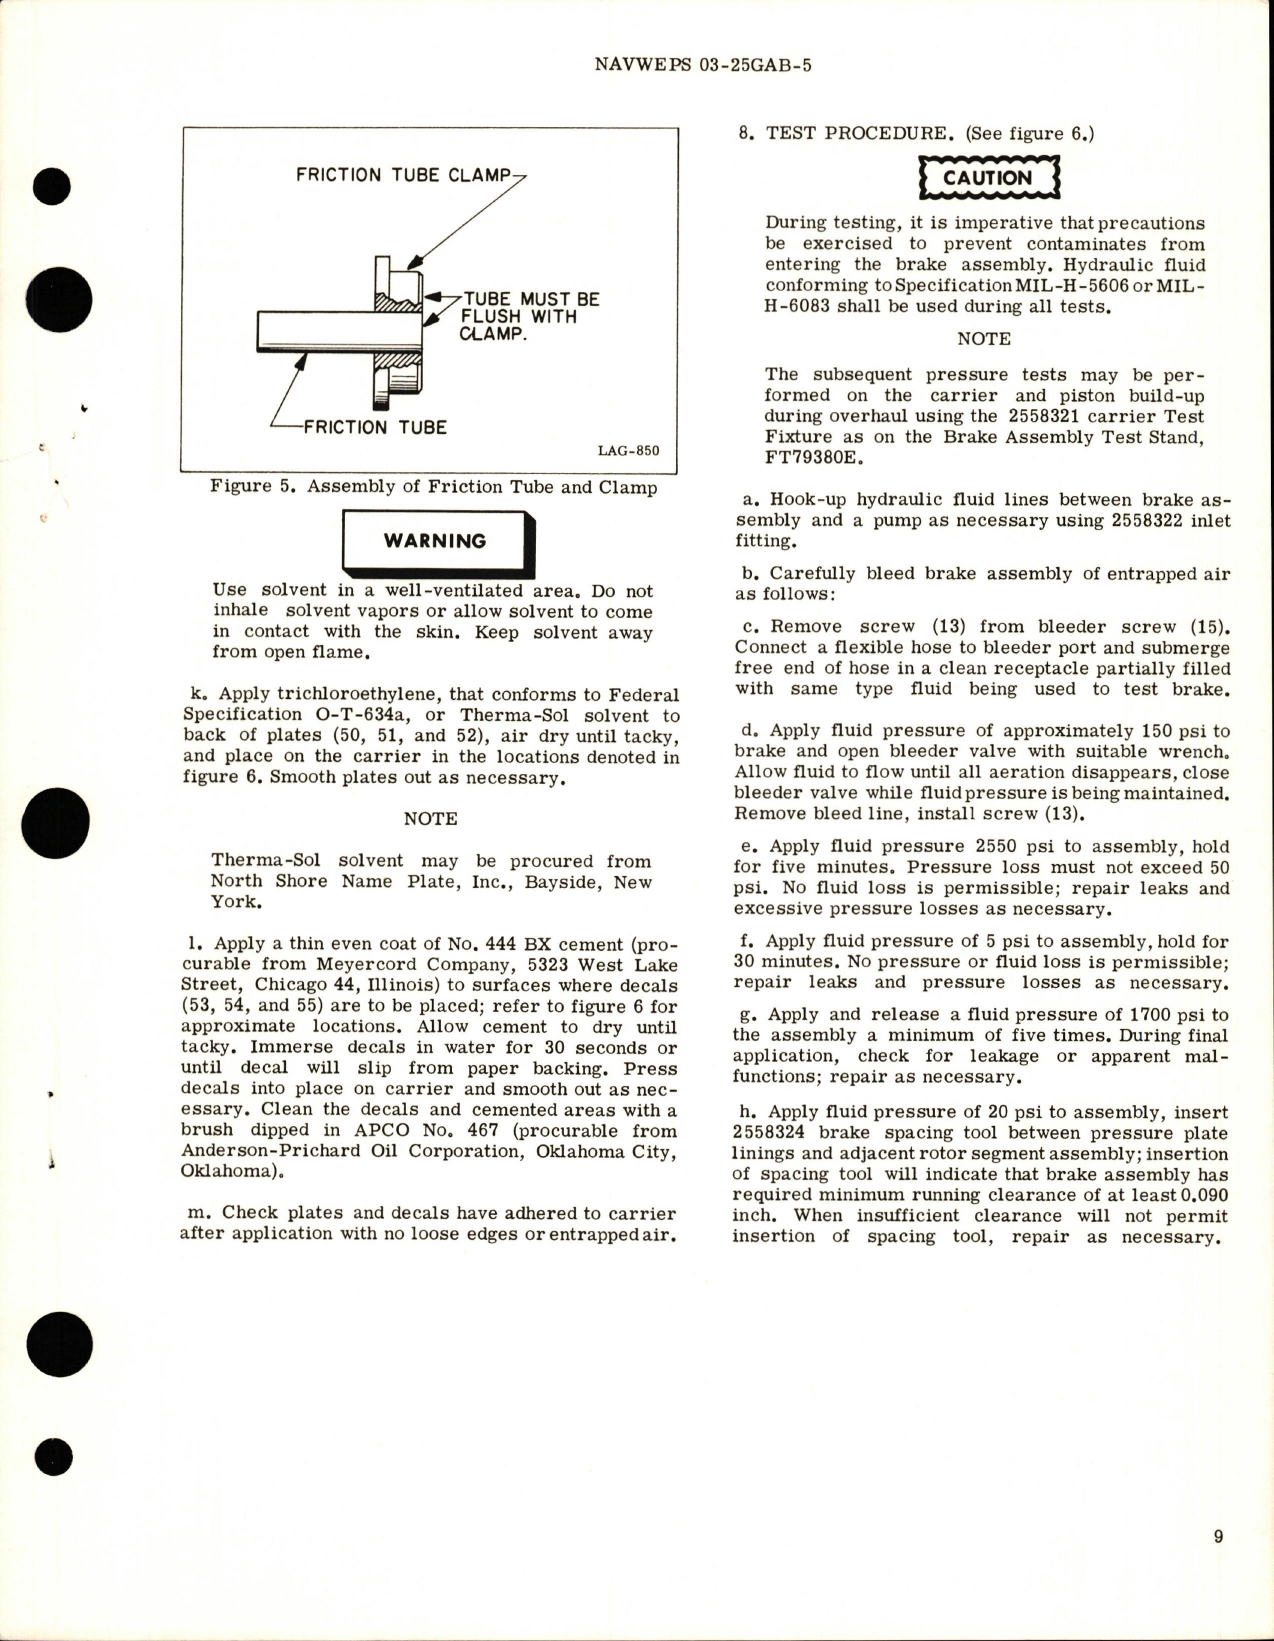 Sample page 5 from AirCorps Library document: Overhaul Instructions with Parts Breakdown for Brake Assembly - 13.81x8.19-3 Rotor - Part 153950-1 and 153950-2